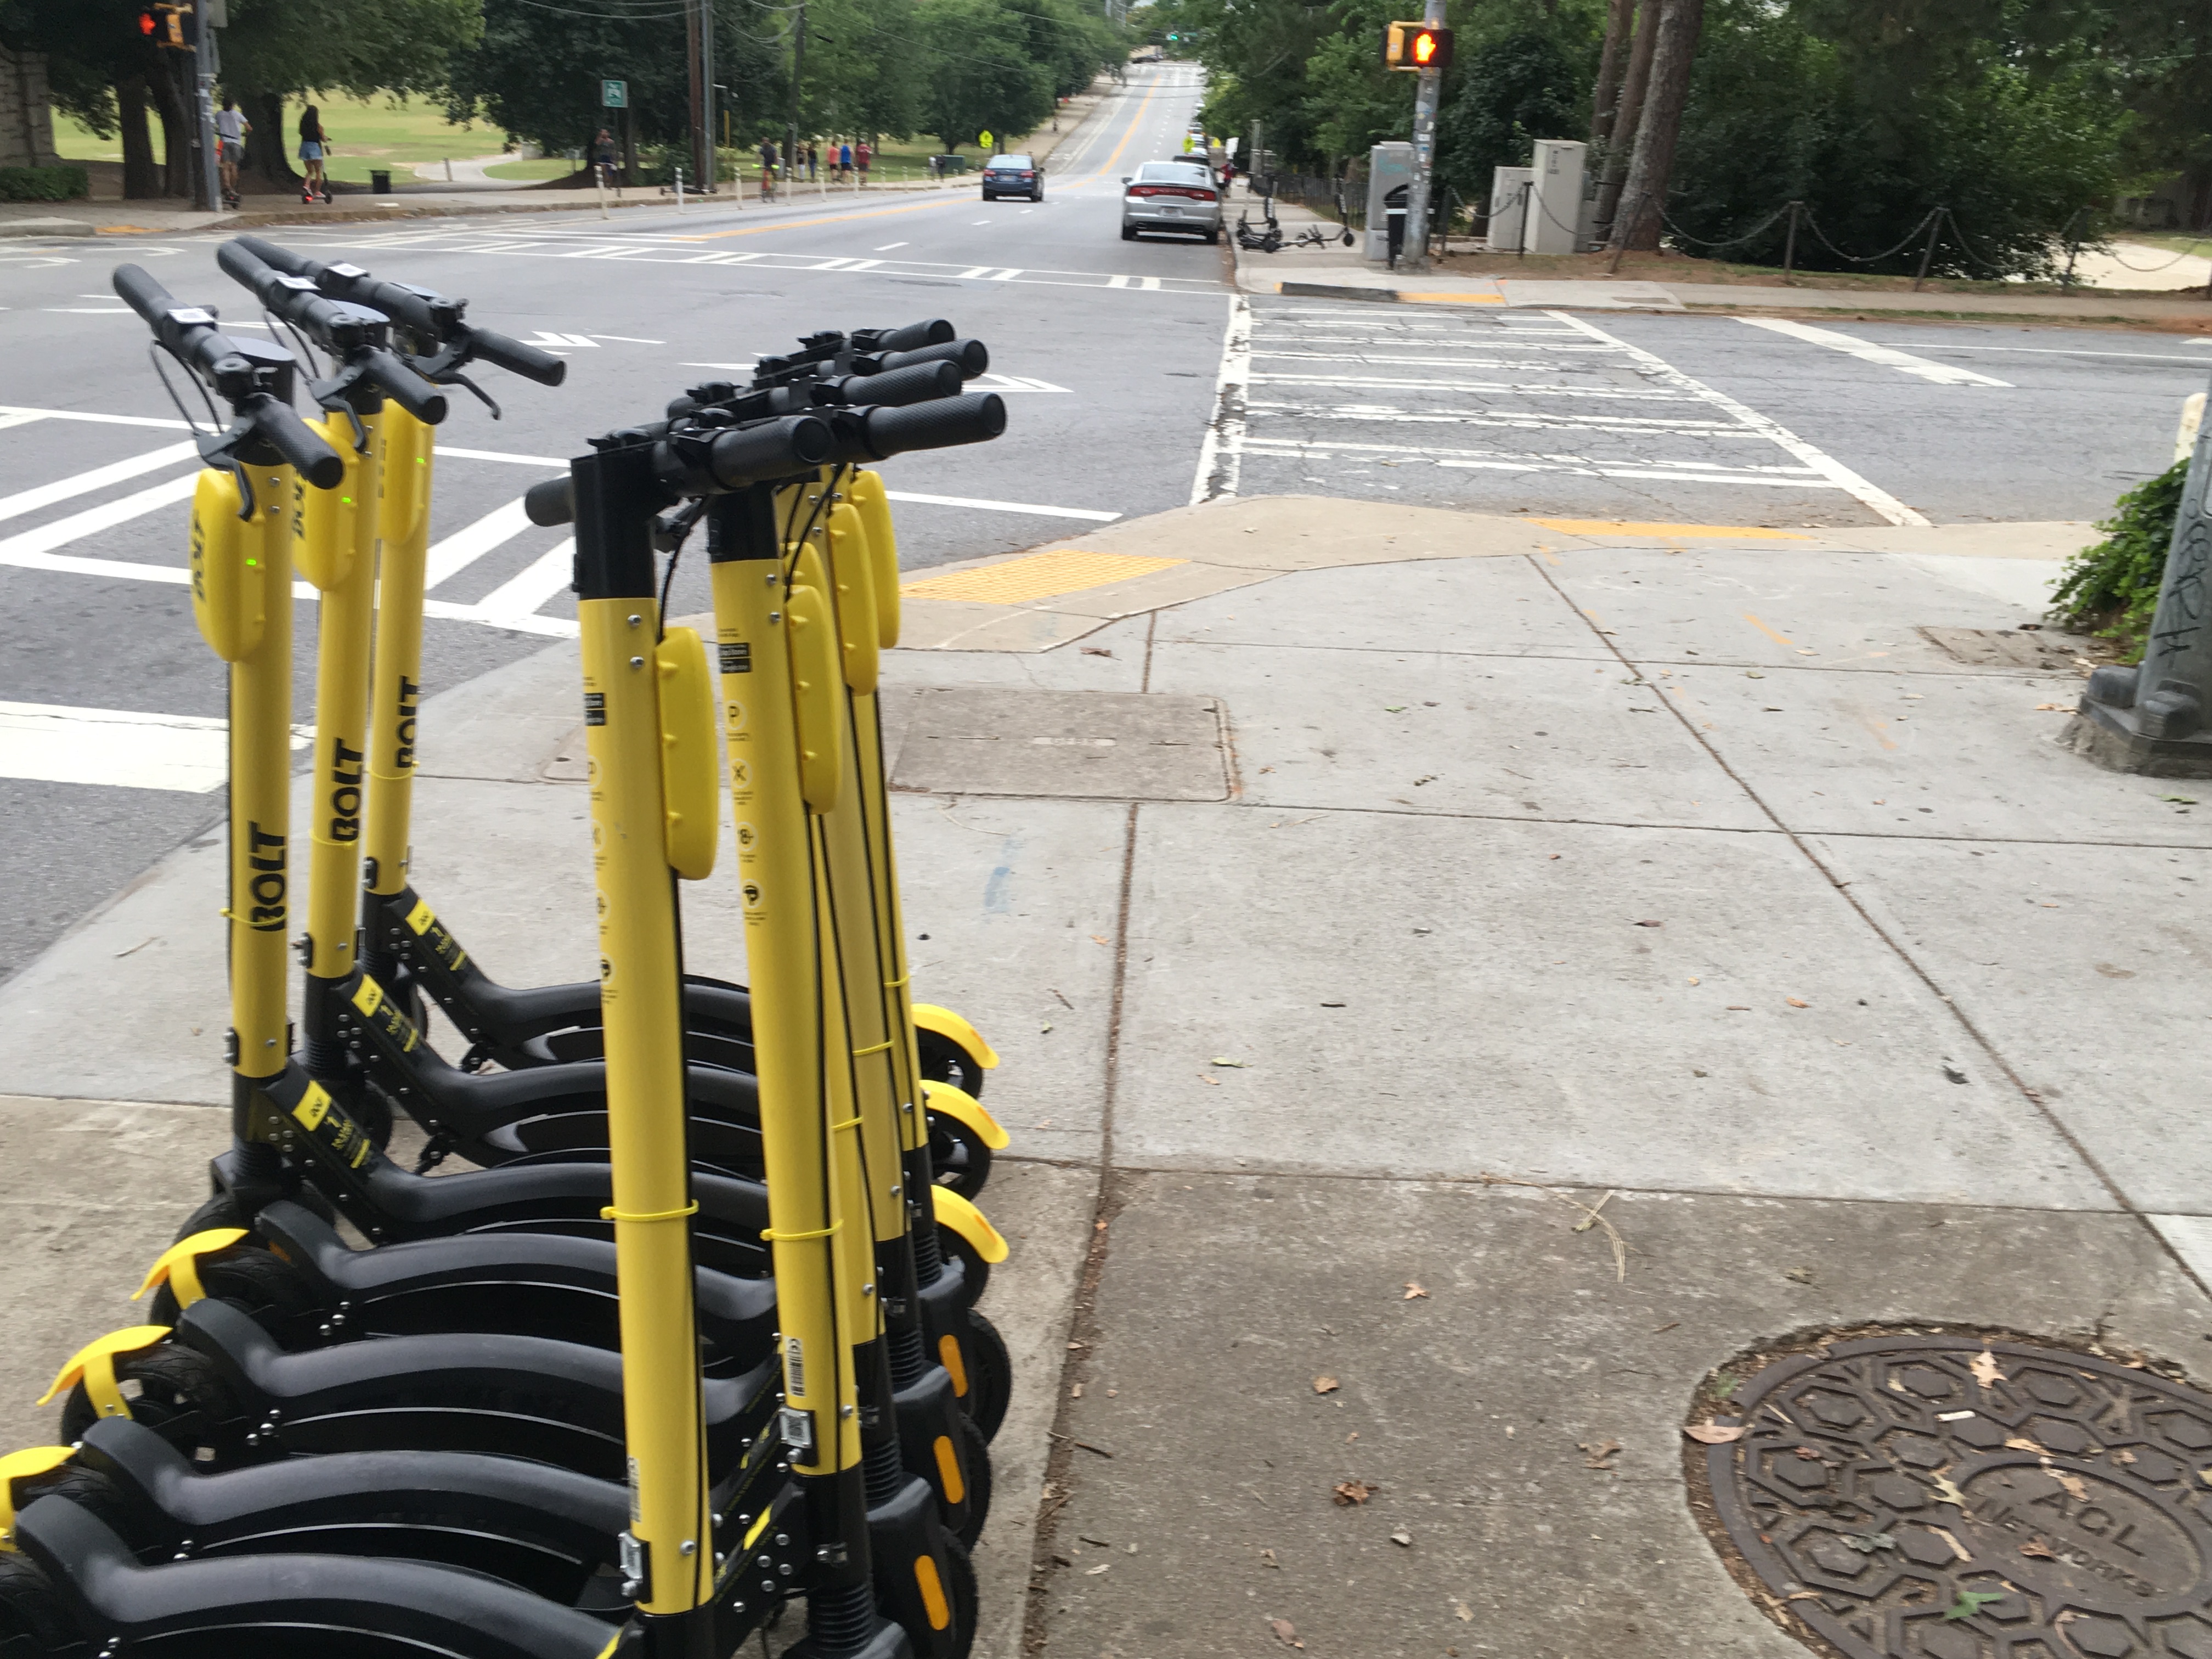 A row of yellow scooters parked by by Piedmont Park. Credit/file: Maggie Lee